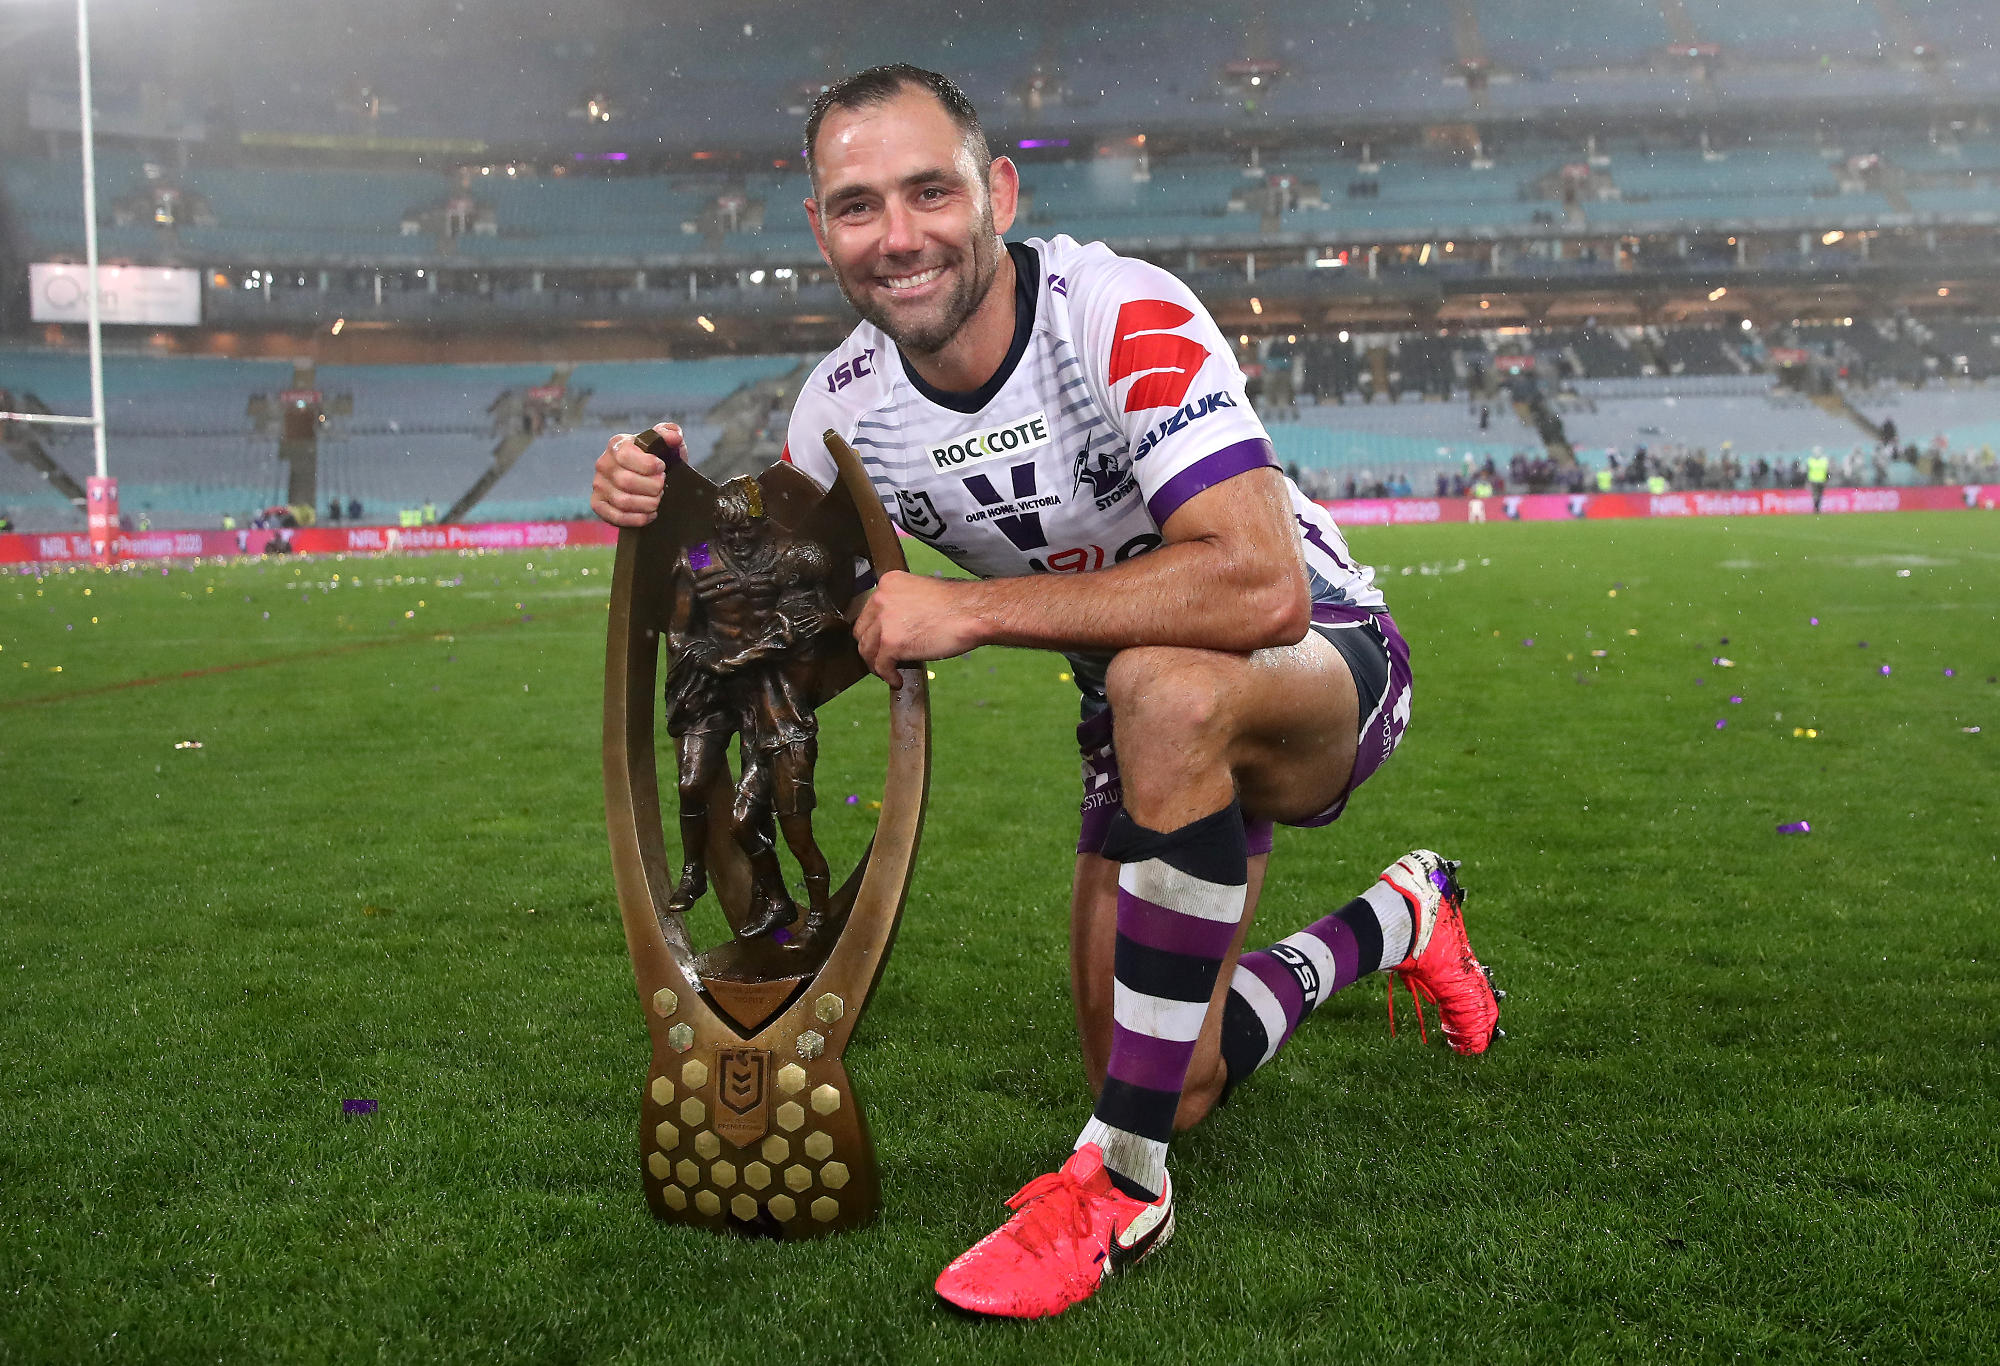 Cameron Smith of the Storm poses with the Premiership trophy